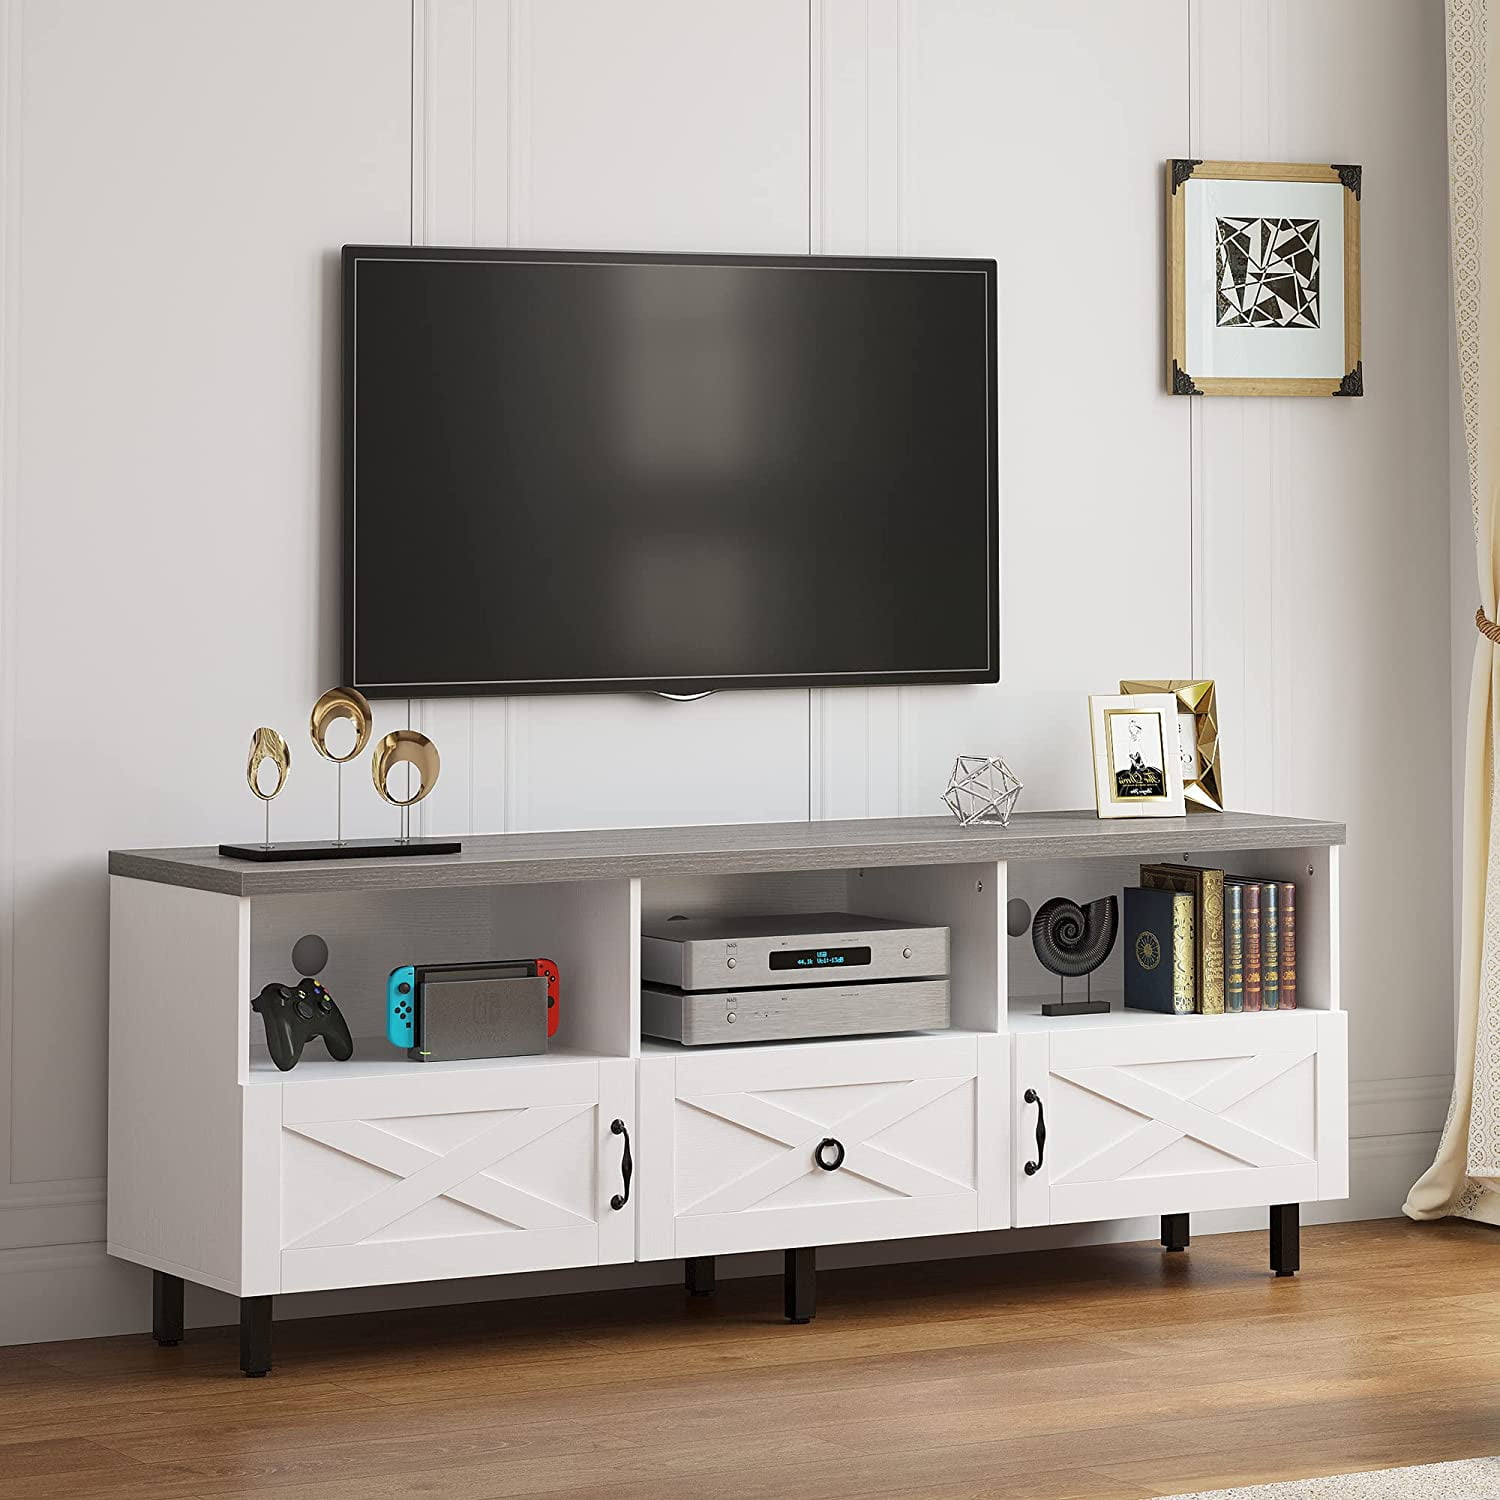 Dextrus Modern Tv Stand For 70 65 60 55 Inch Boho Wood Table Farmhouse Media Console With Storage Cabinet And Open Shelves Living Room Bedroom White Grey Com